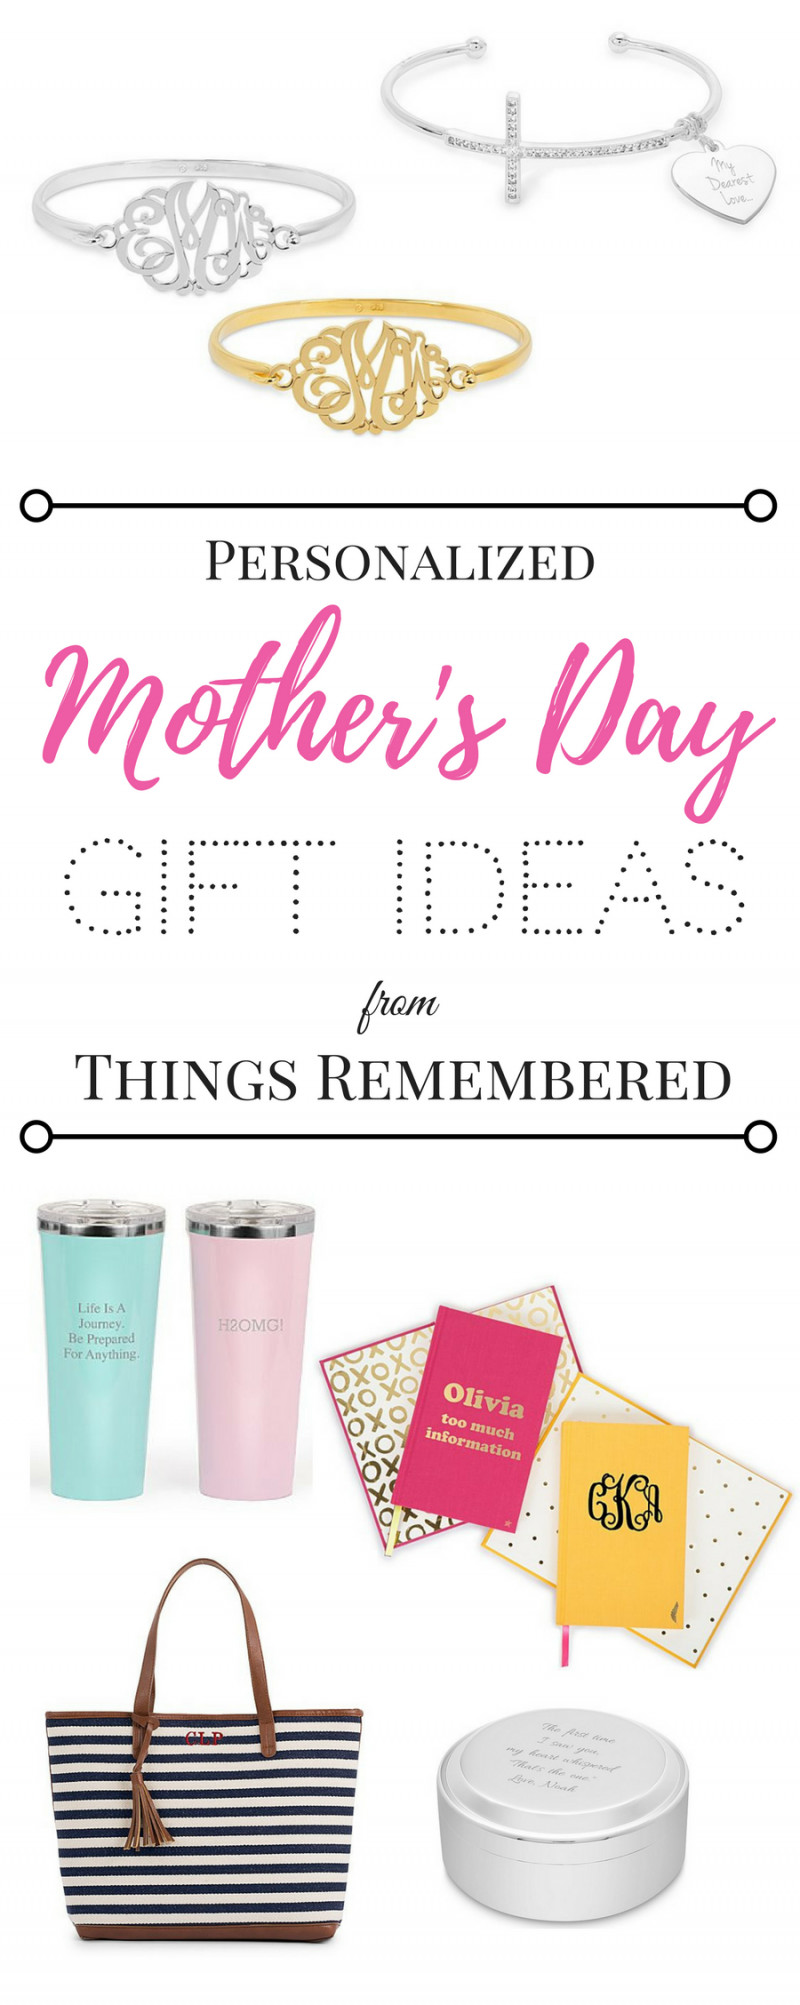 Personalized Mother's Day Gifts
 Personalized Mother s Day Gift Ideas from Things